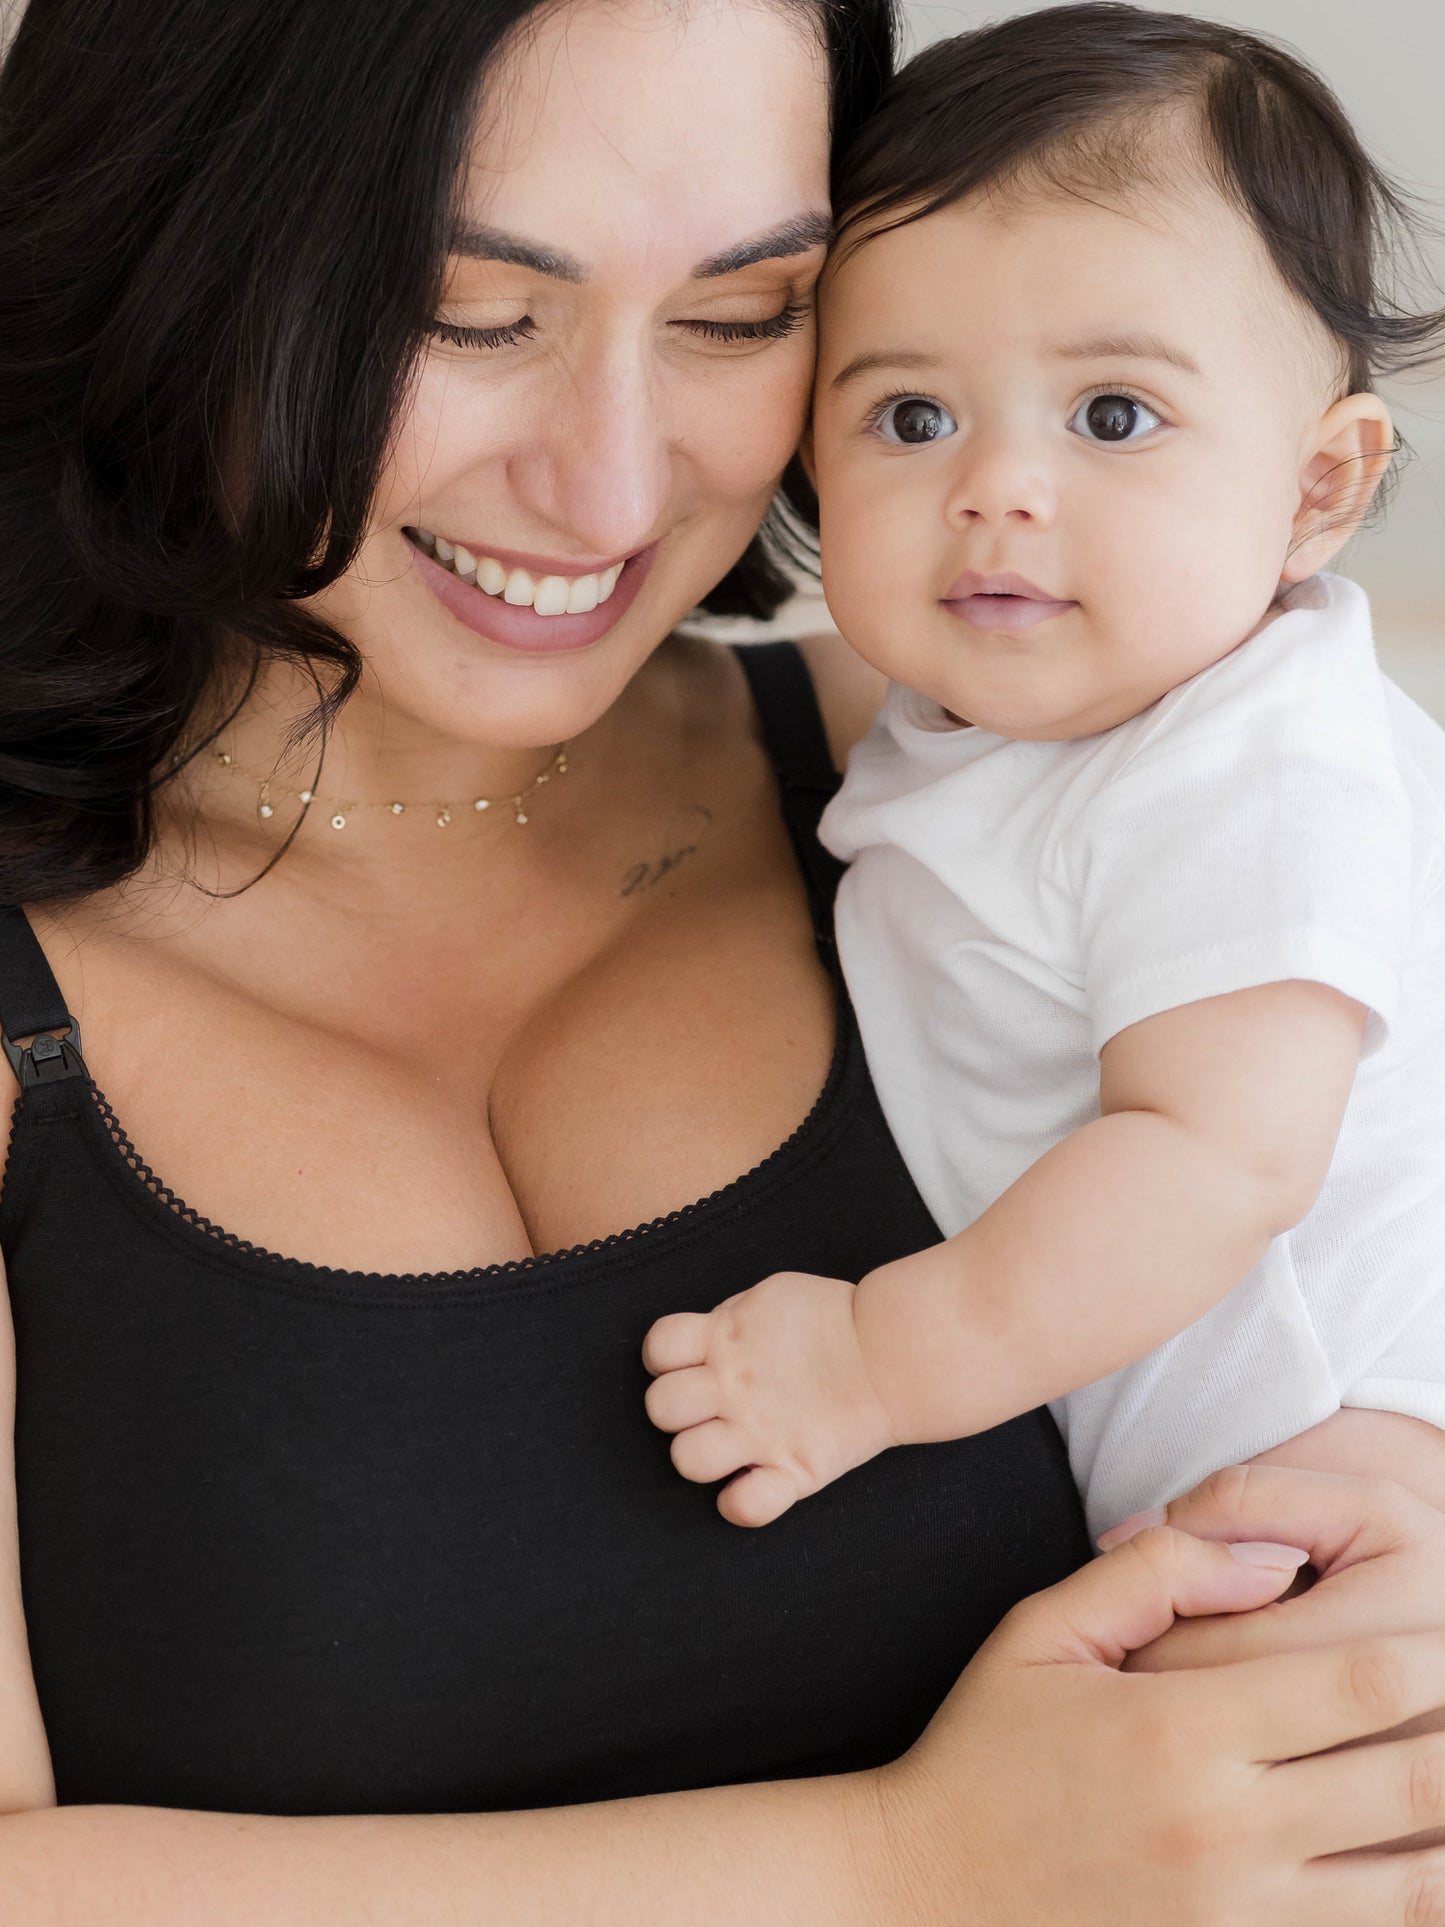 Close up image of model holding baby and wearing the Picot Trim Nursing Camisole in black, highlighting the trim detail